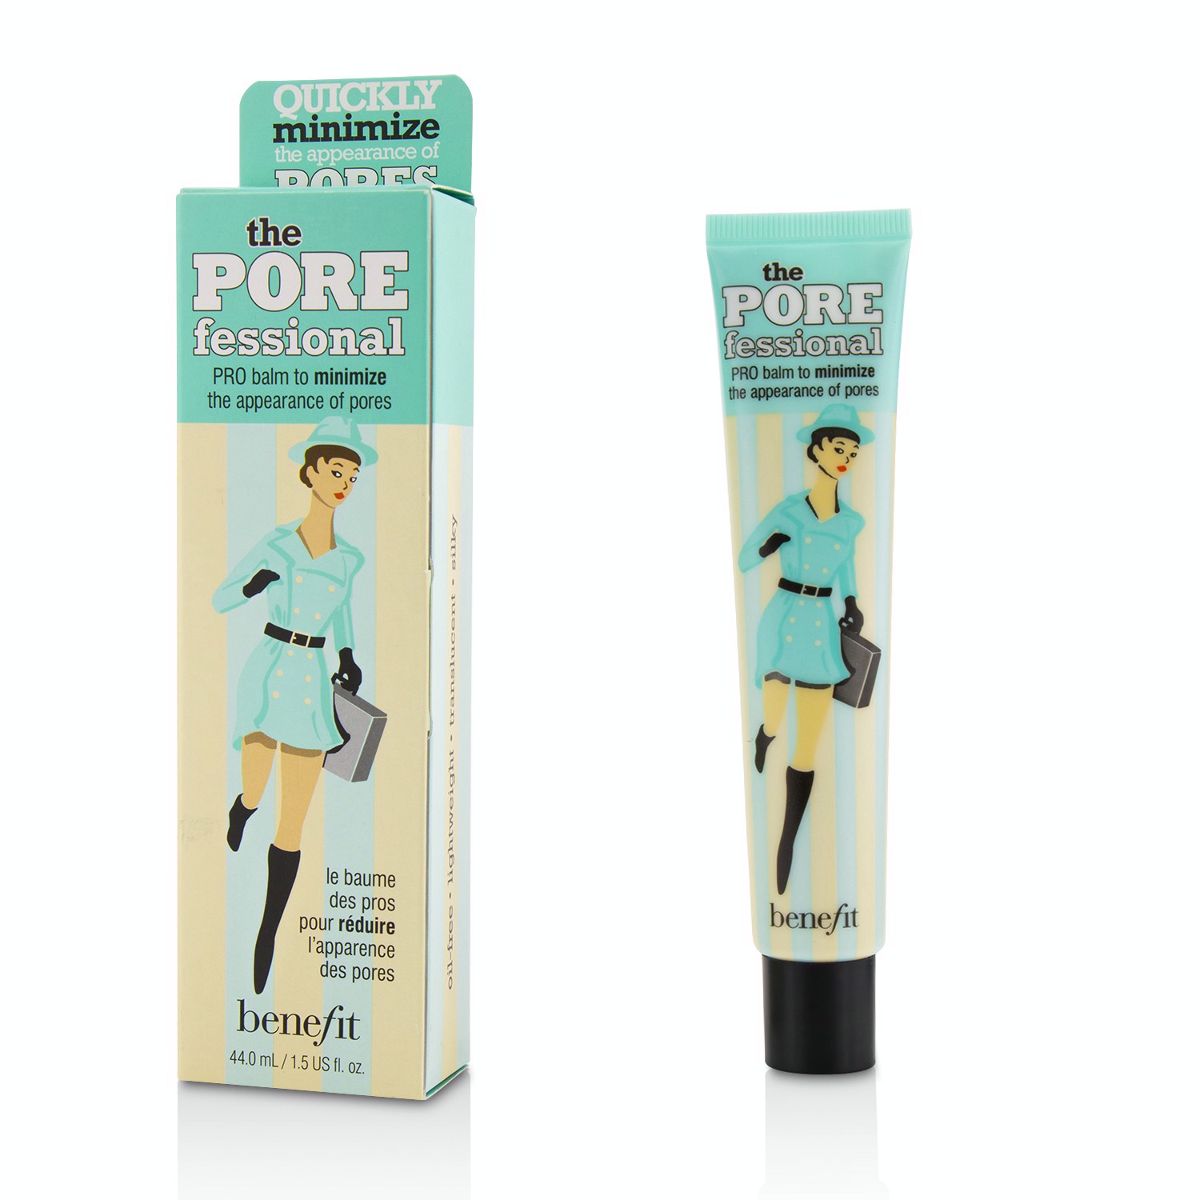 The Porefessional Pro Balm to Minimize the Appearance of Pores (Value Size) Benefit Image